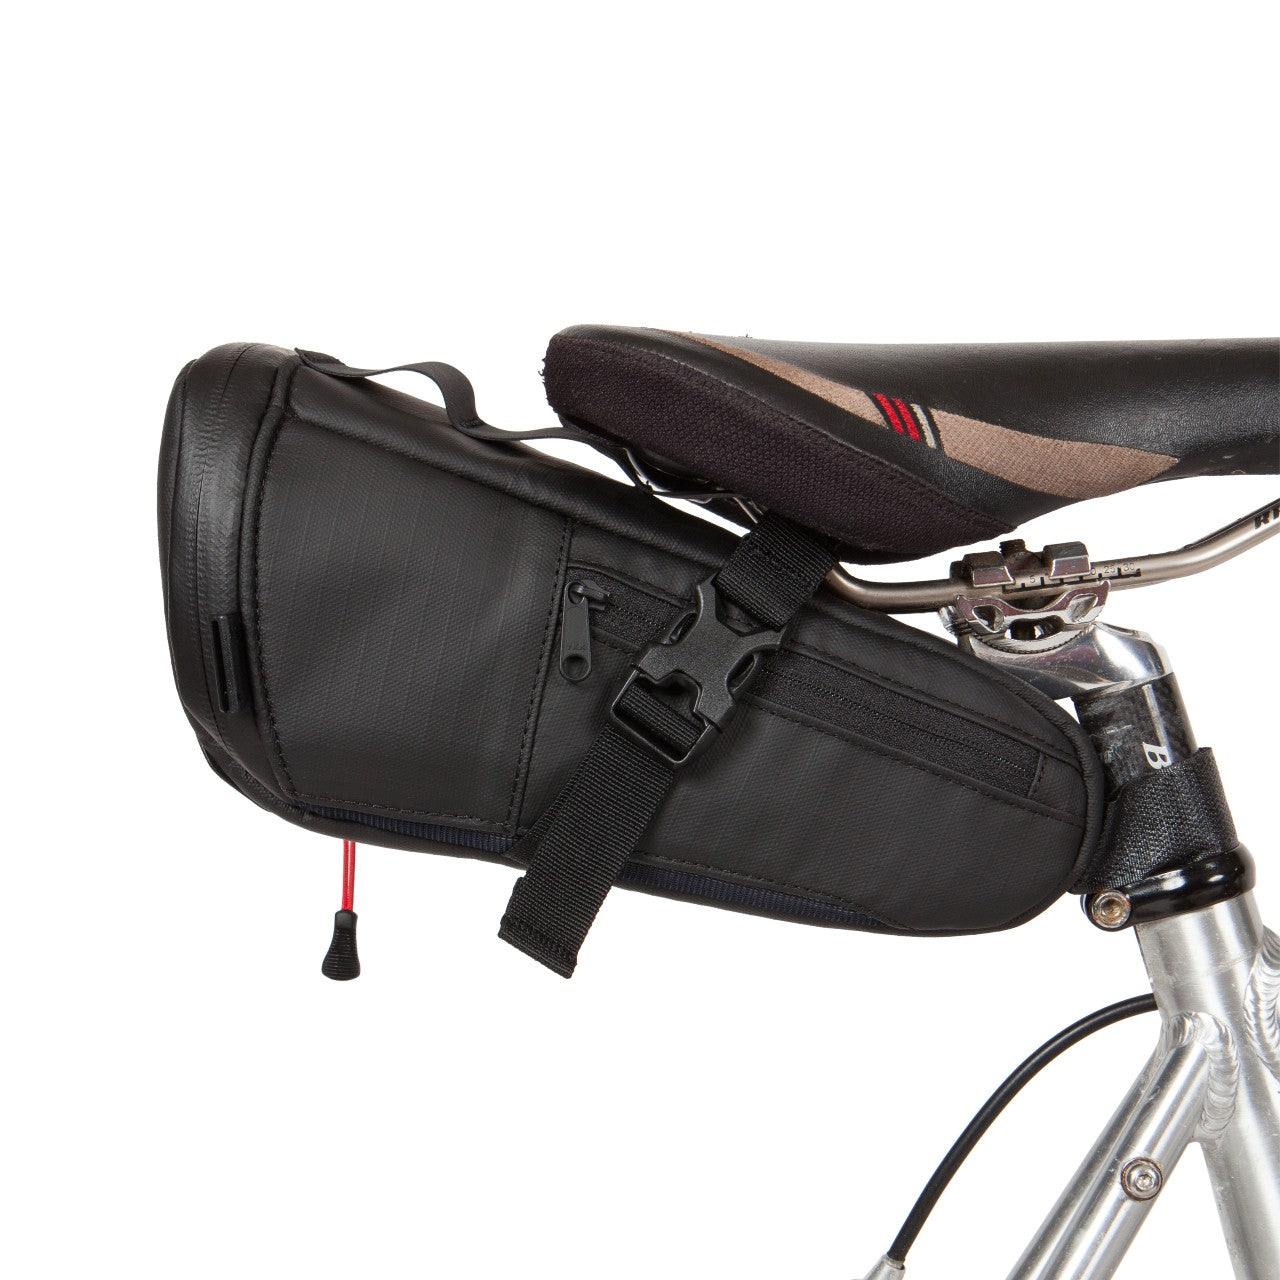 Big And Cheap: DIY Cargo Bike Bags – Tales On Two Wheels